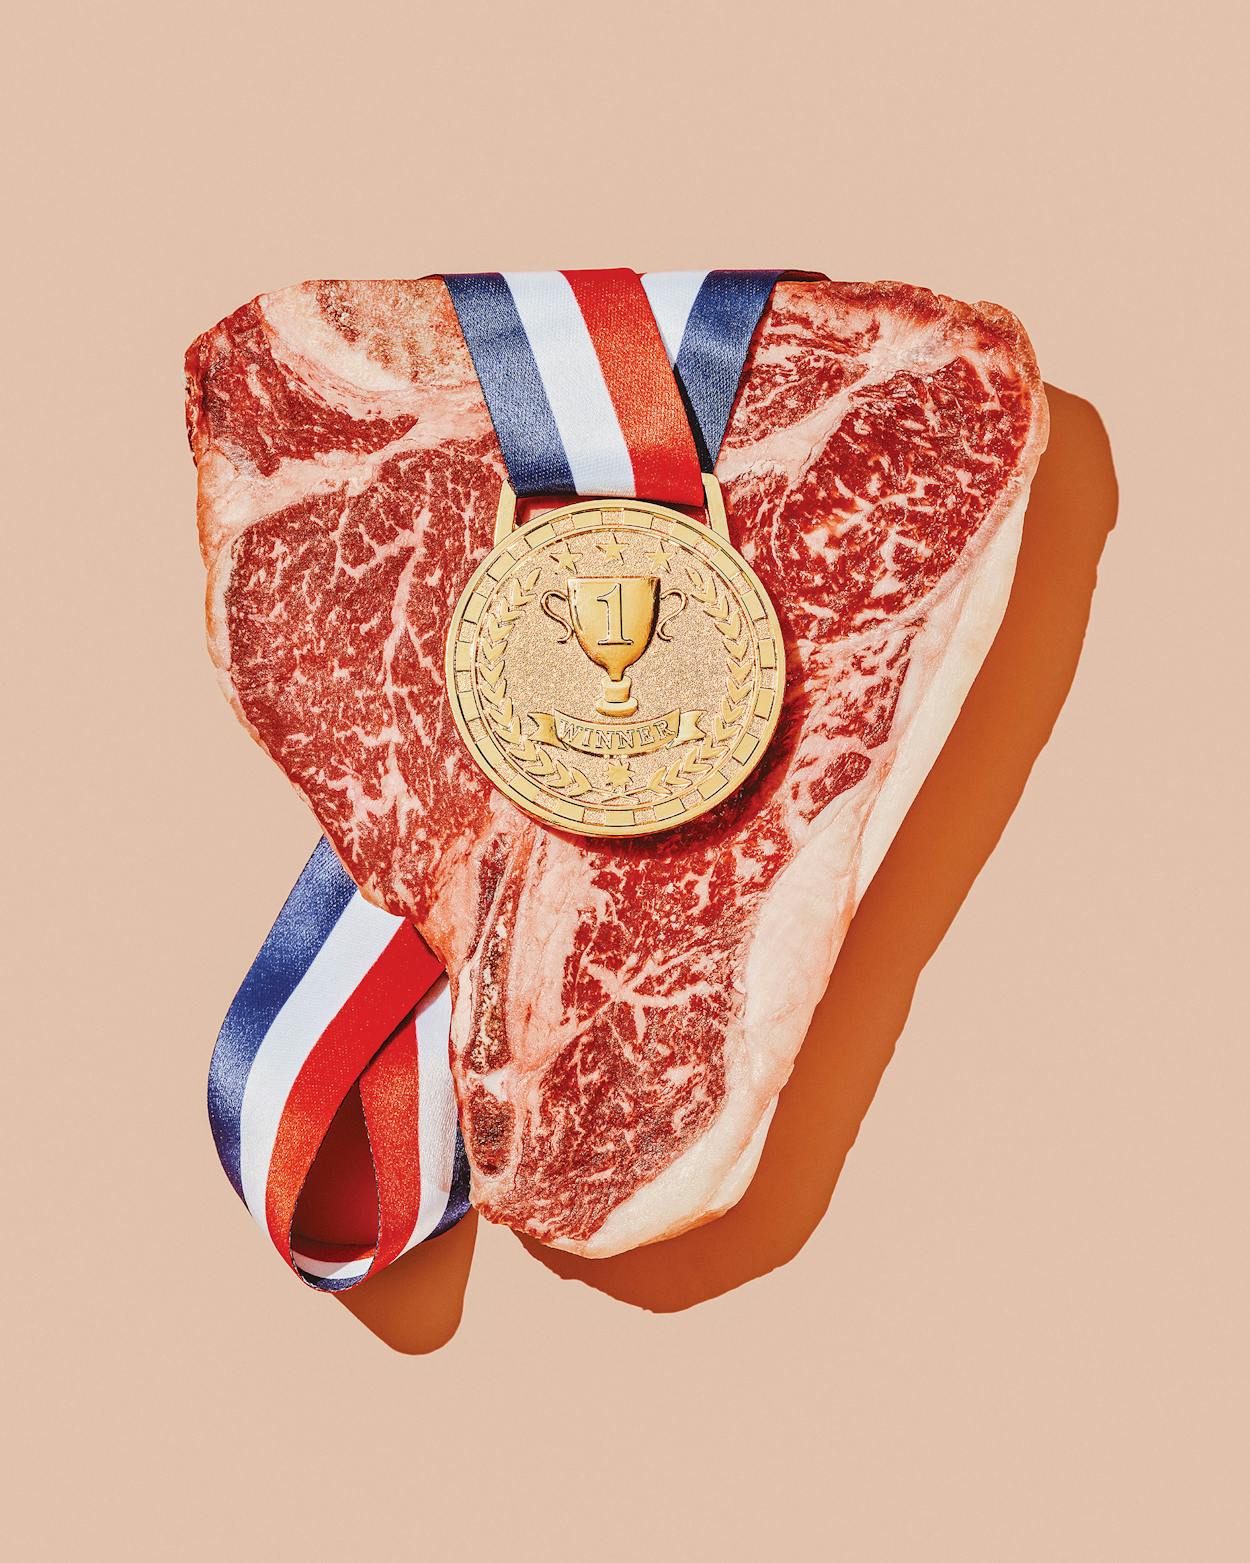 Positive Impact of Beef to Support Muscle Gain, Beef Loving Texans